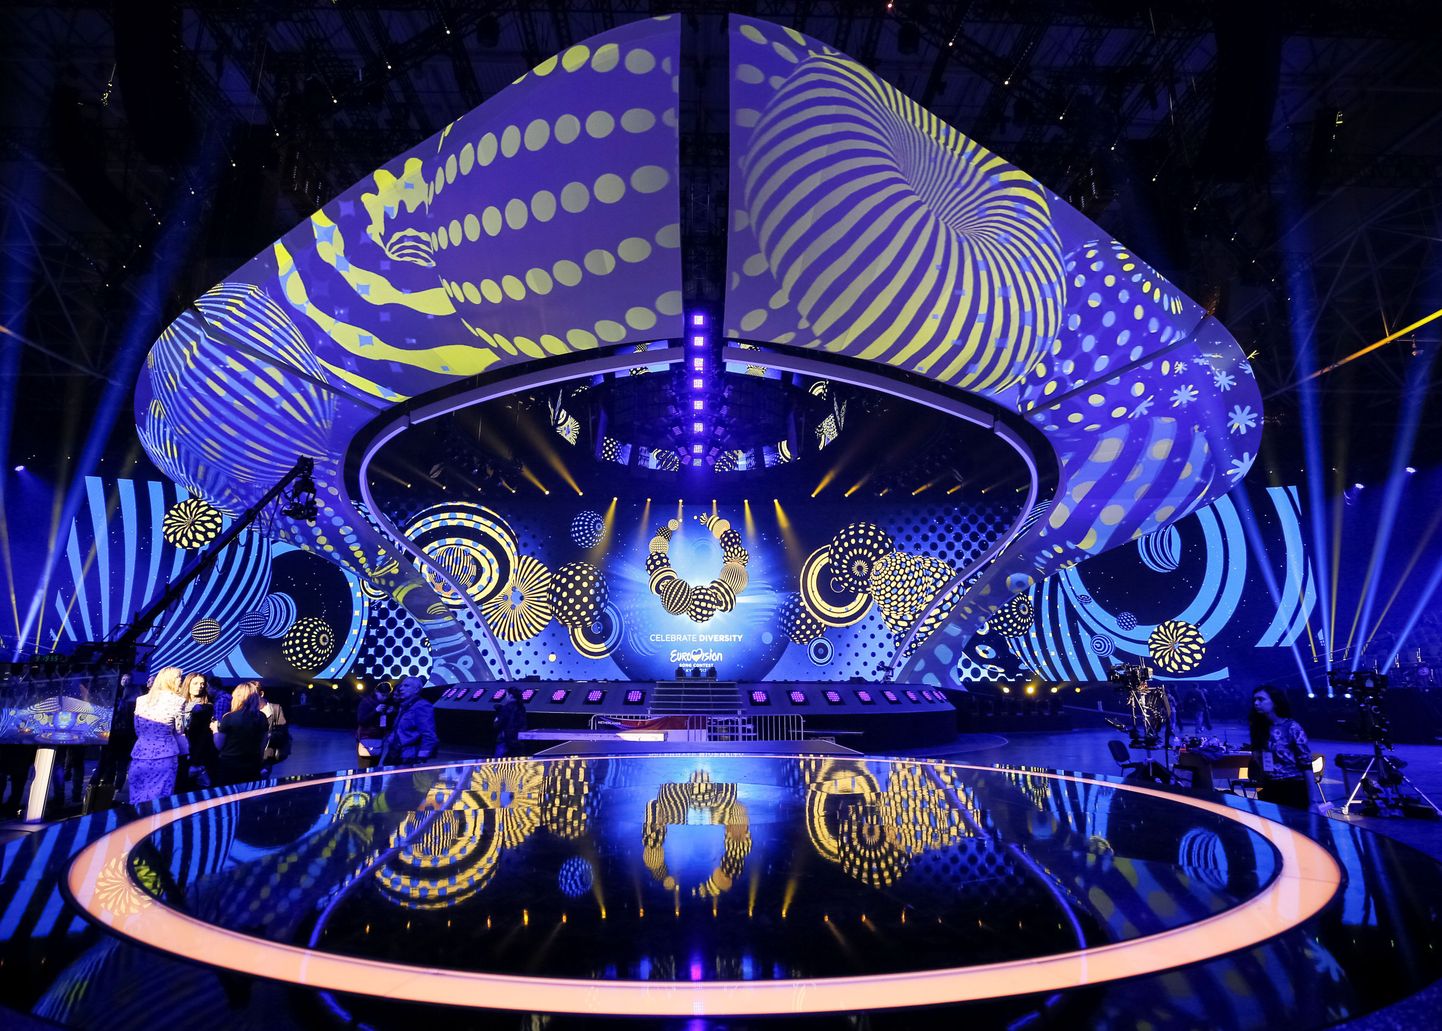 A stage for the Eurovision Song Contest 2017 is seen at the International Exhibition Centre in Kiev, Ukraine, April 28, 2017. REUTERS/Gleb Garanich